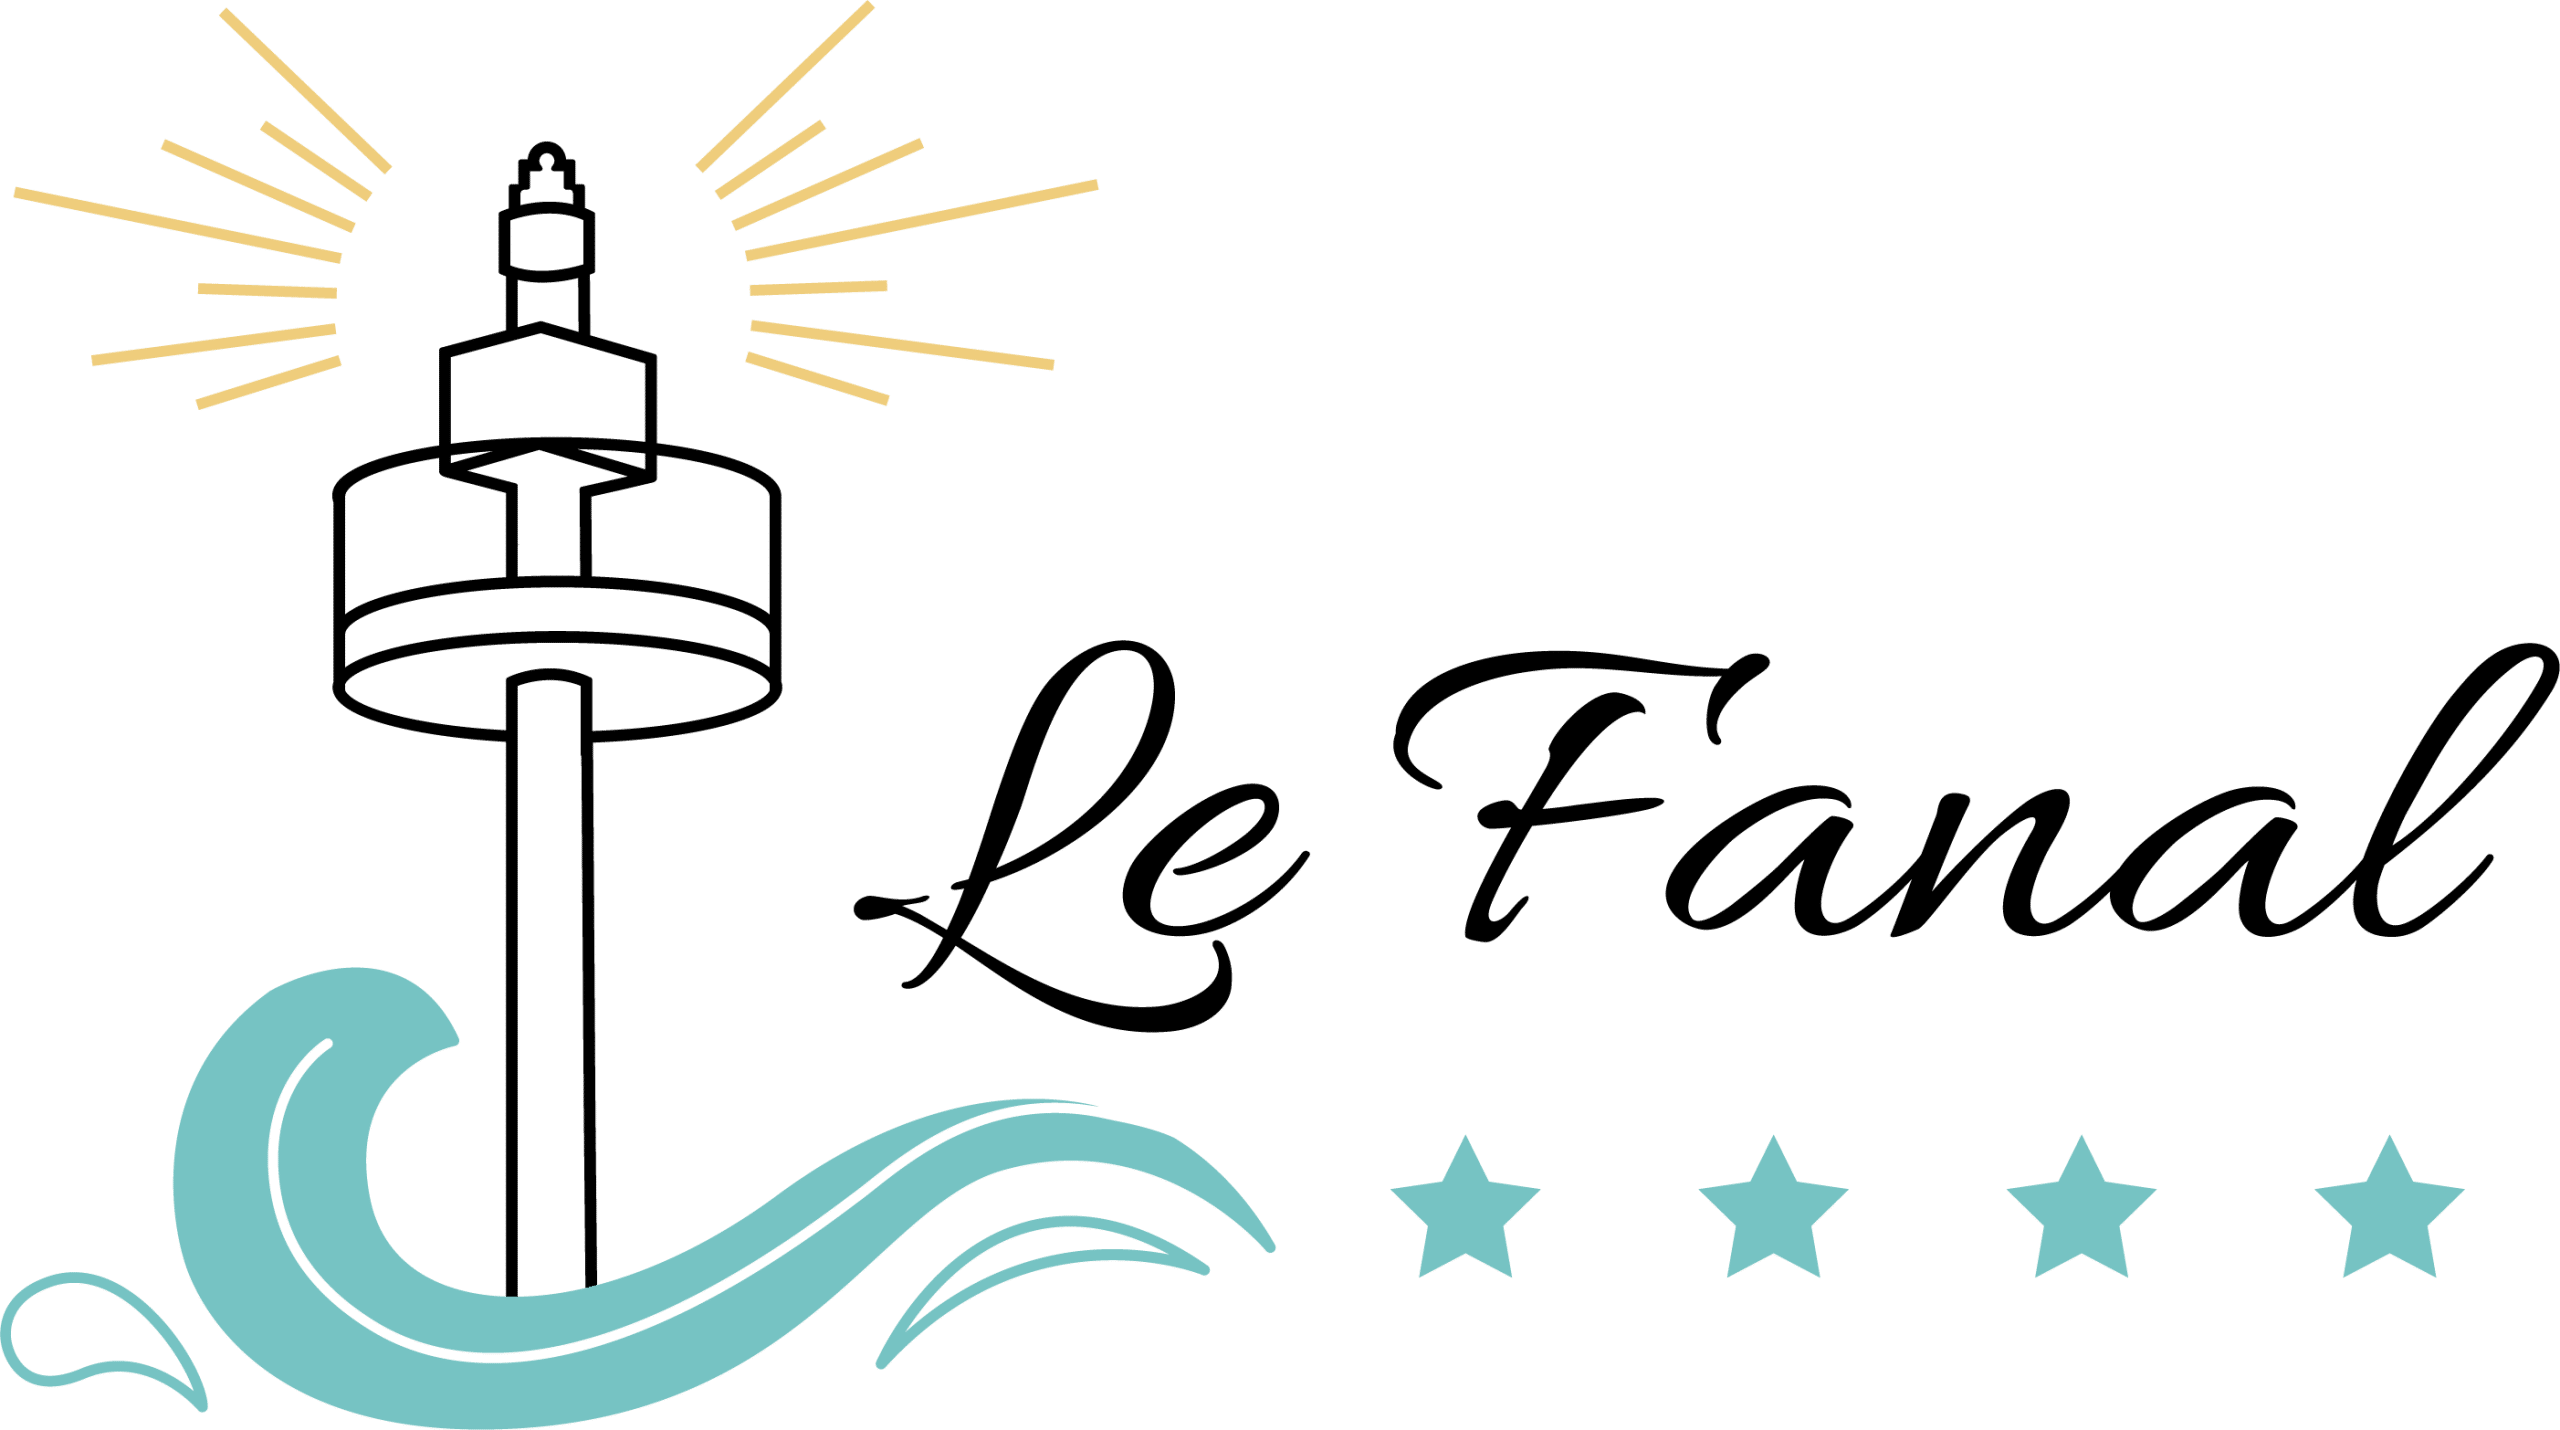 Camping Le Fanal